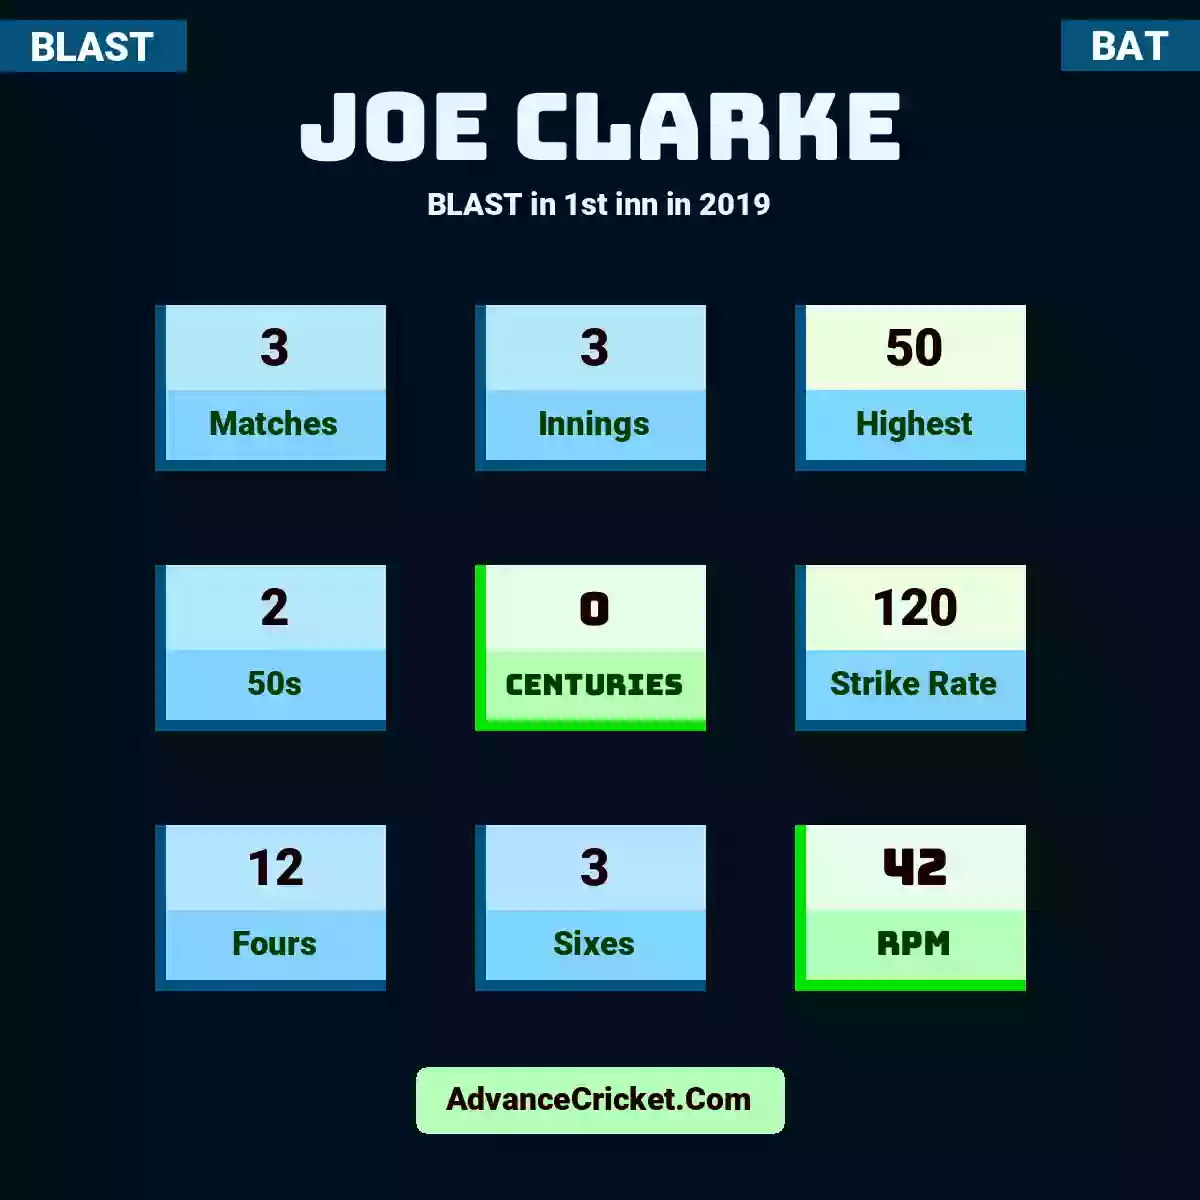 Joe Clarke BLAST  in 1st inn in 2019, Joe Clarke played 3 matches, scored 50 runs as highest, 2 half-centuries, and 0 centuries, with a strike rate of 120. J.Clarke hit 12 fours and 3 sixes, with an RPM of 42.